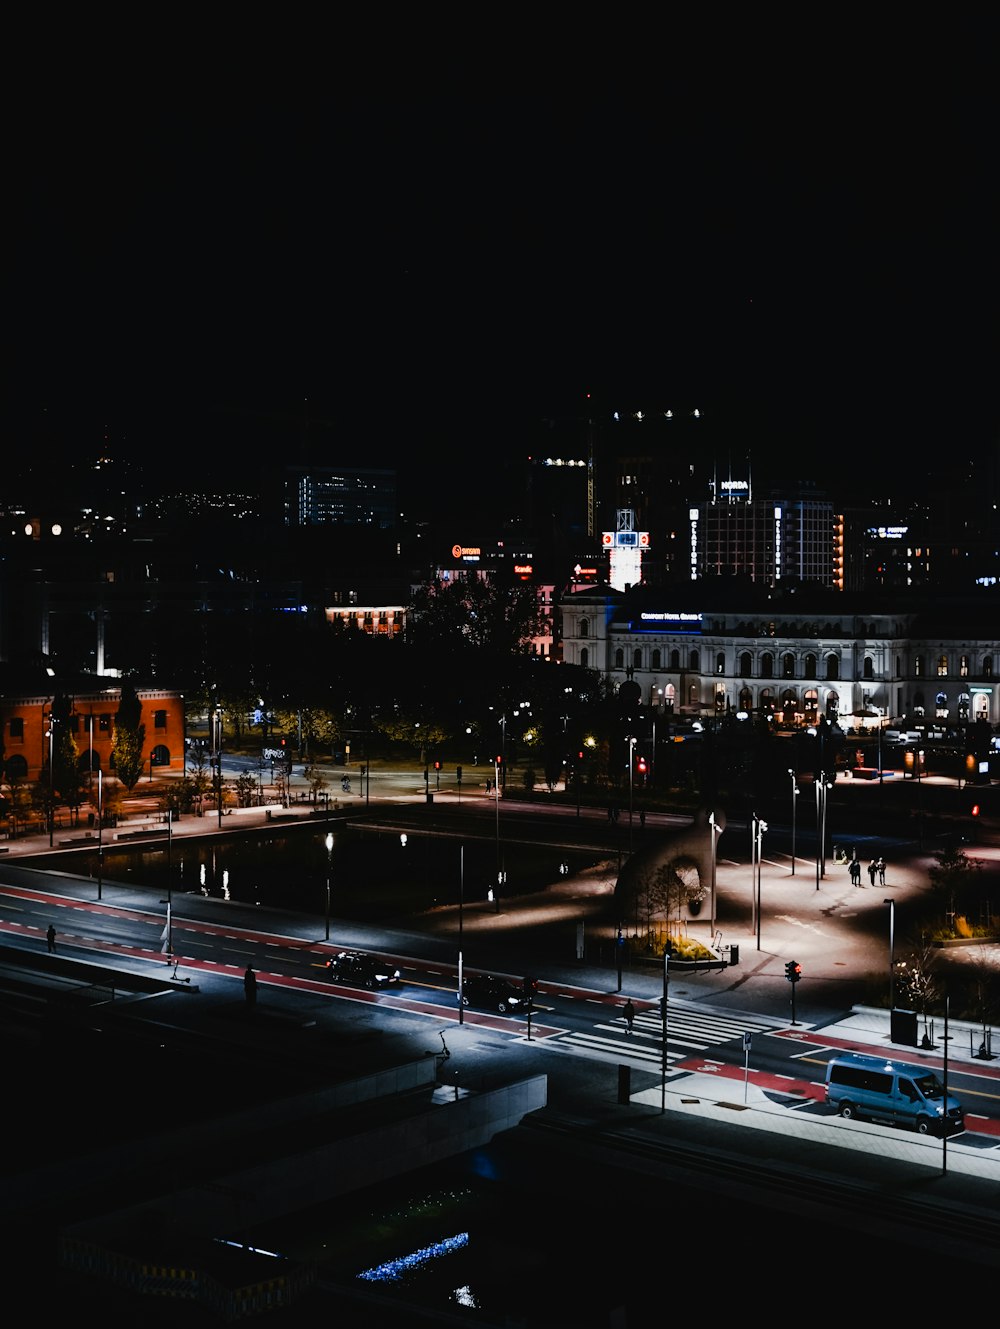 a nighttime view of a city with a lot of traffic